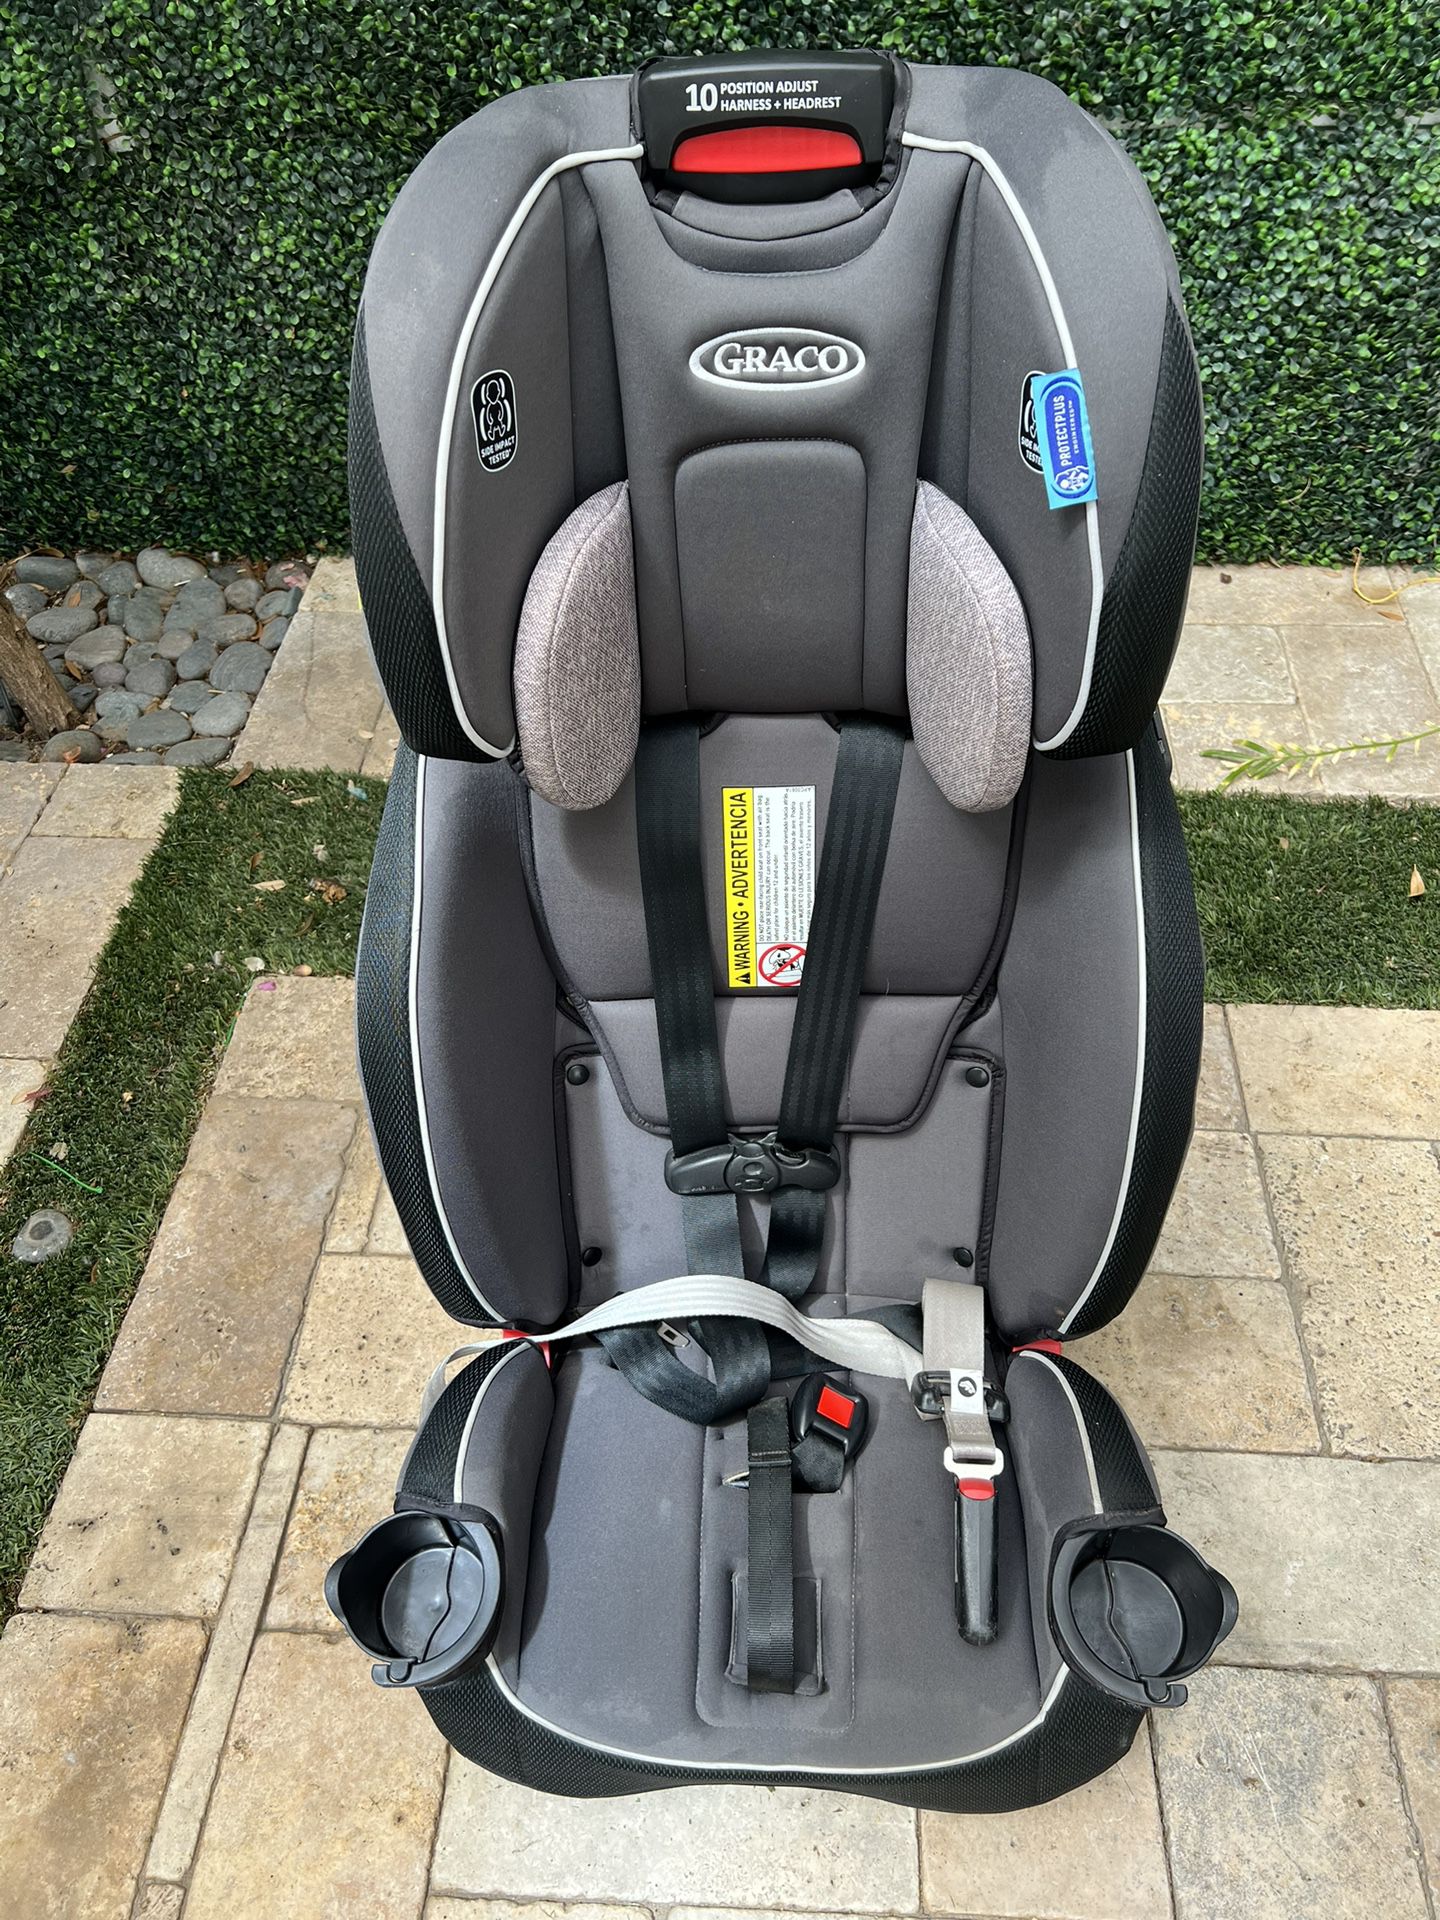 Child car seat “GRACO” up to 40 rounds, 2020